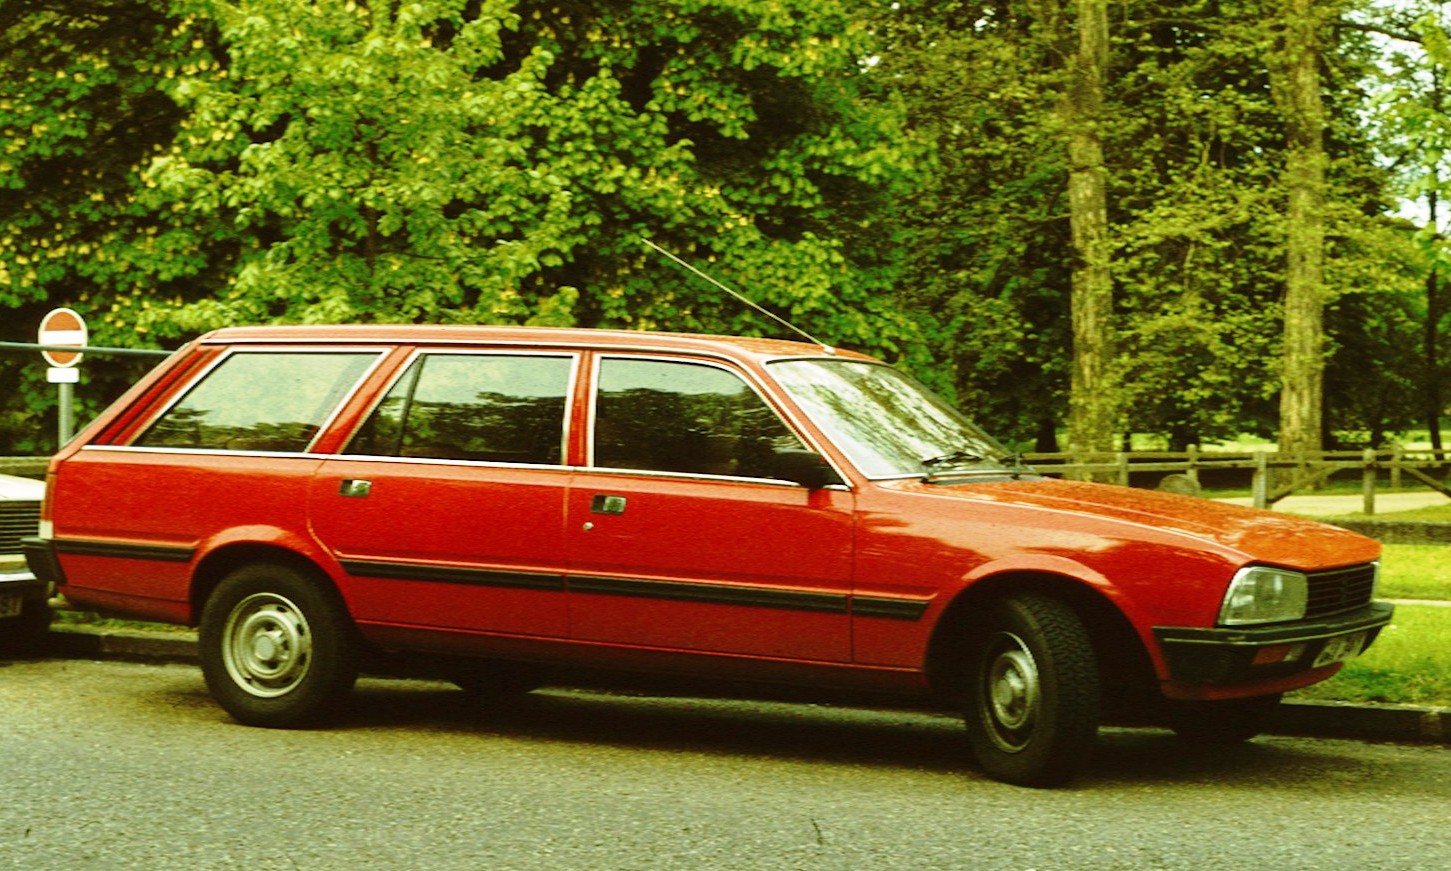 PEUGEOT 505 red